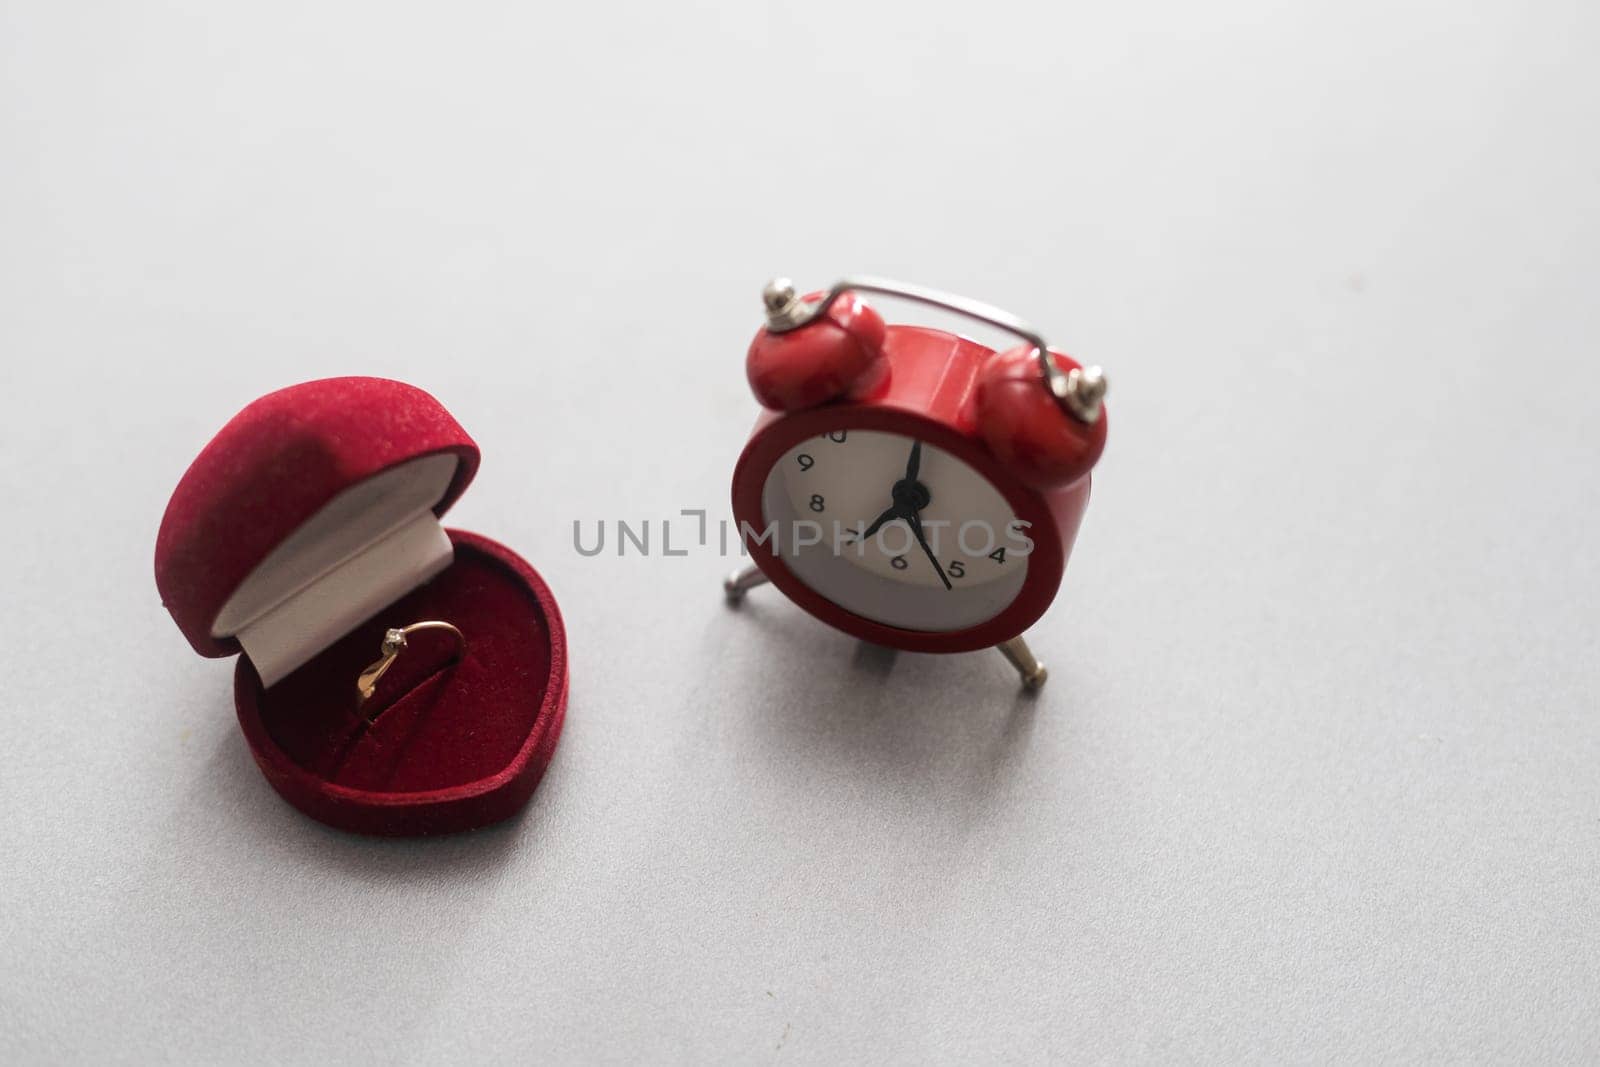 Wedding rings and alarm clock, wedding time concept